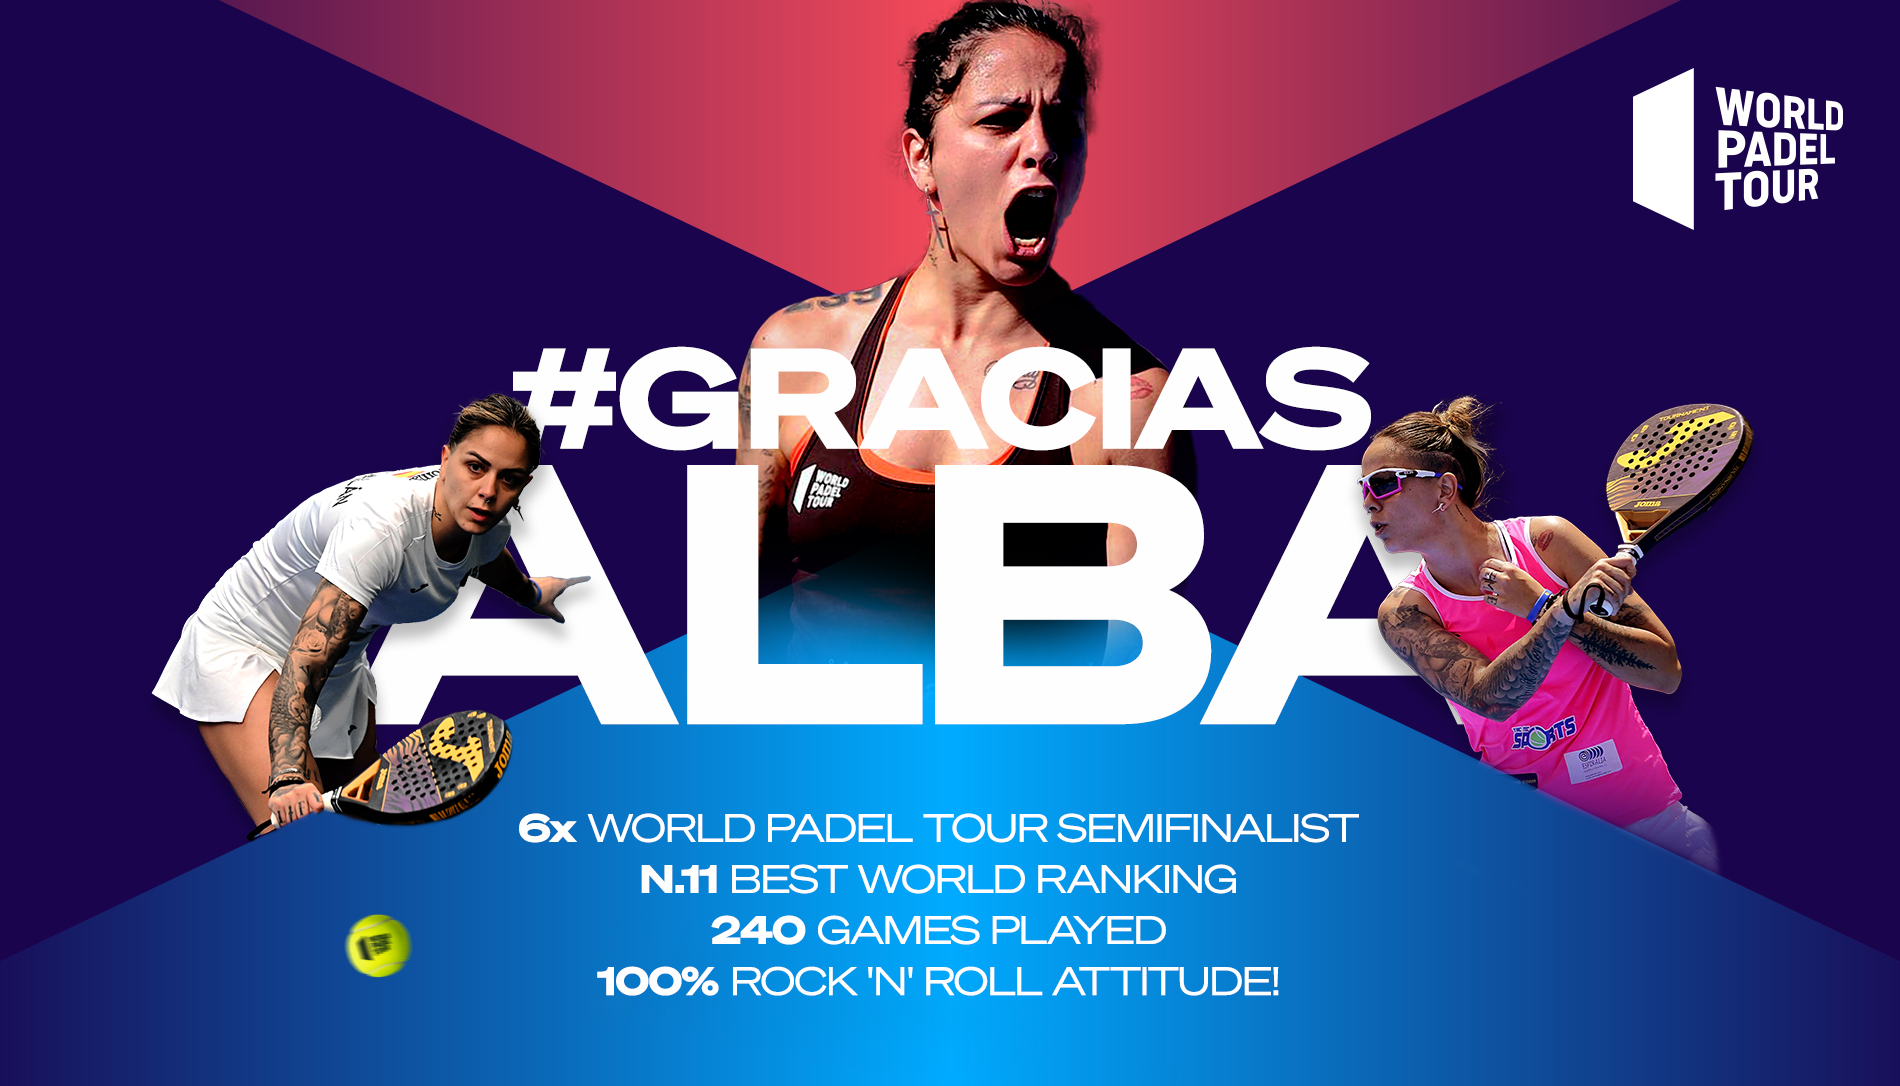 Alba Galán retires from professional padel